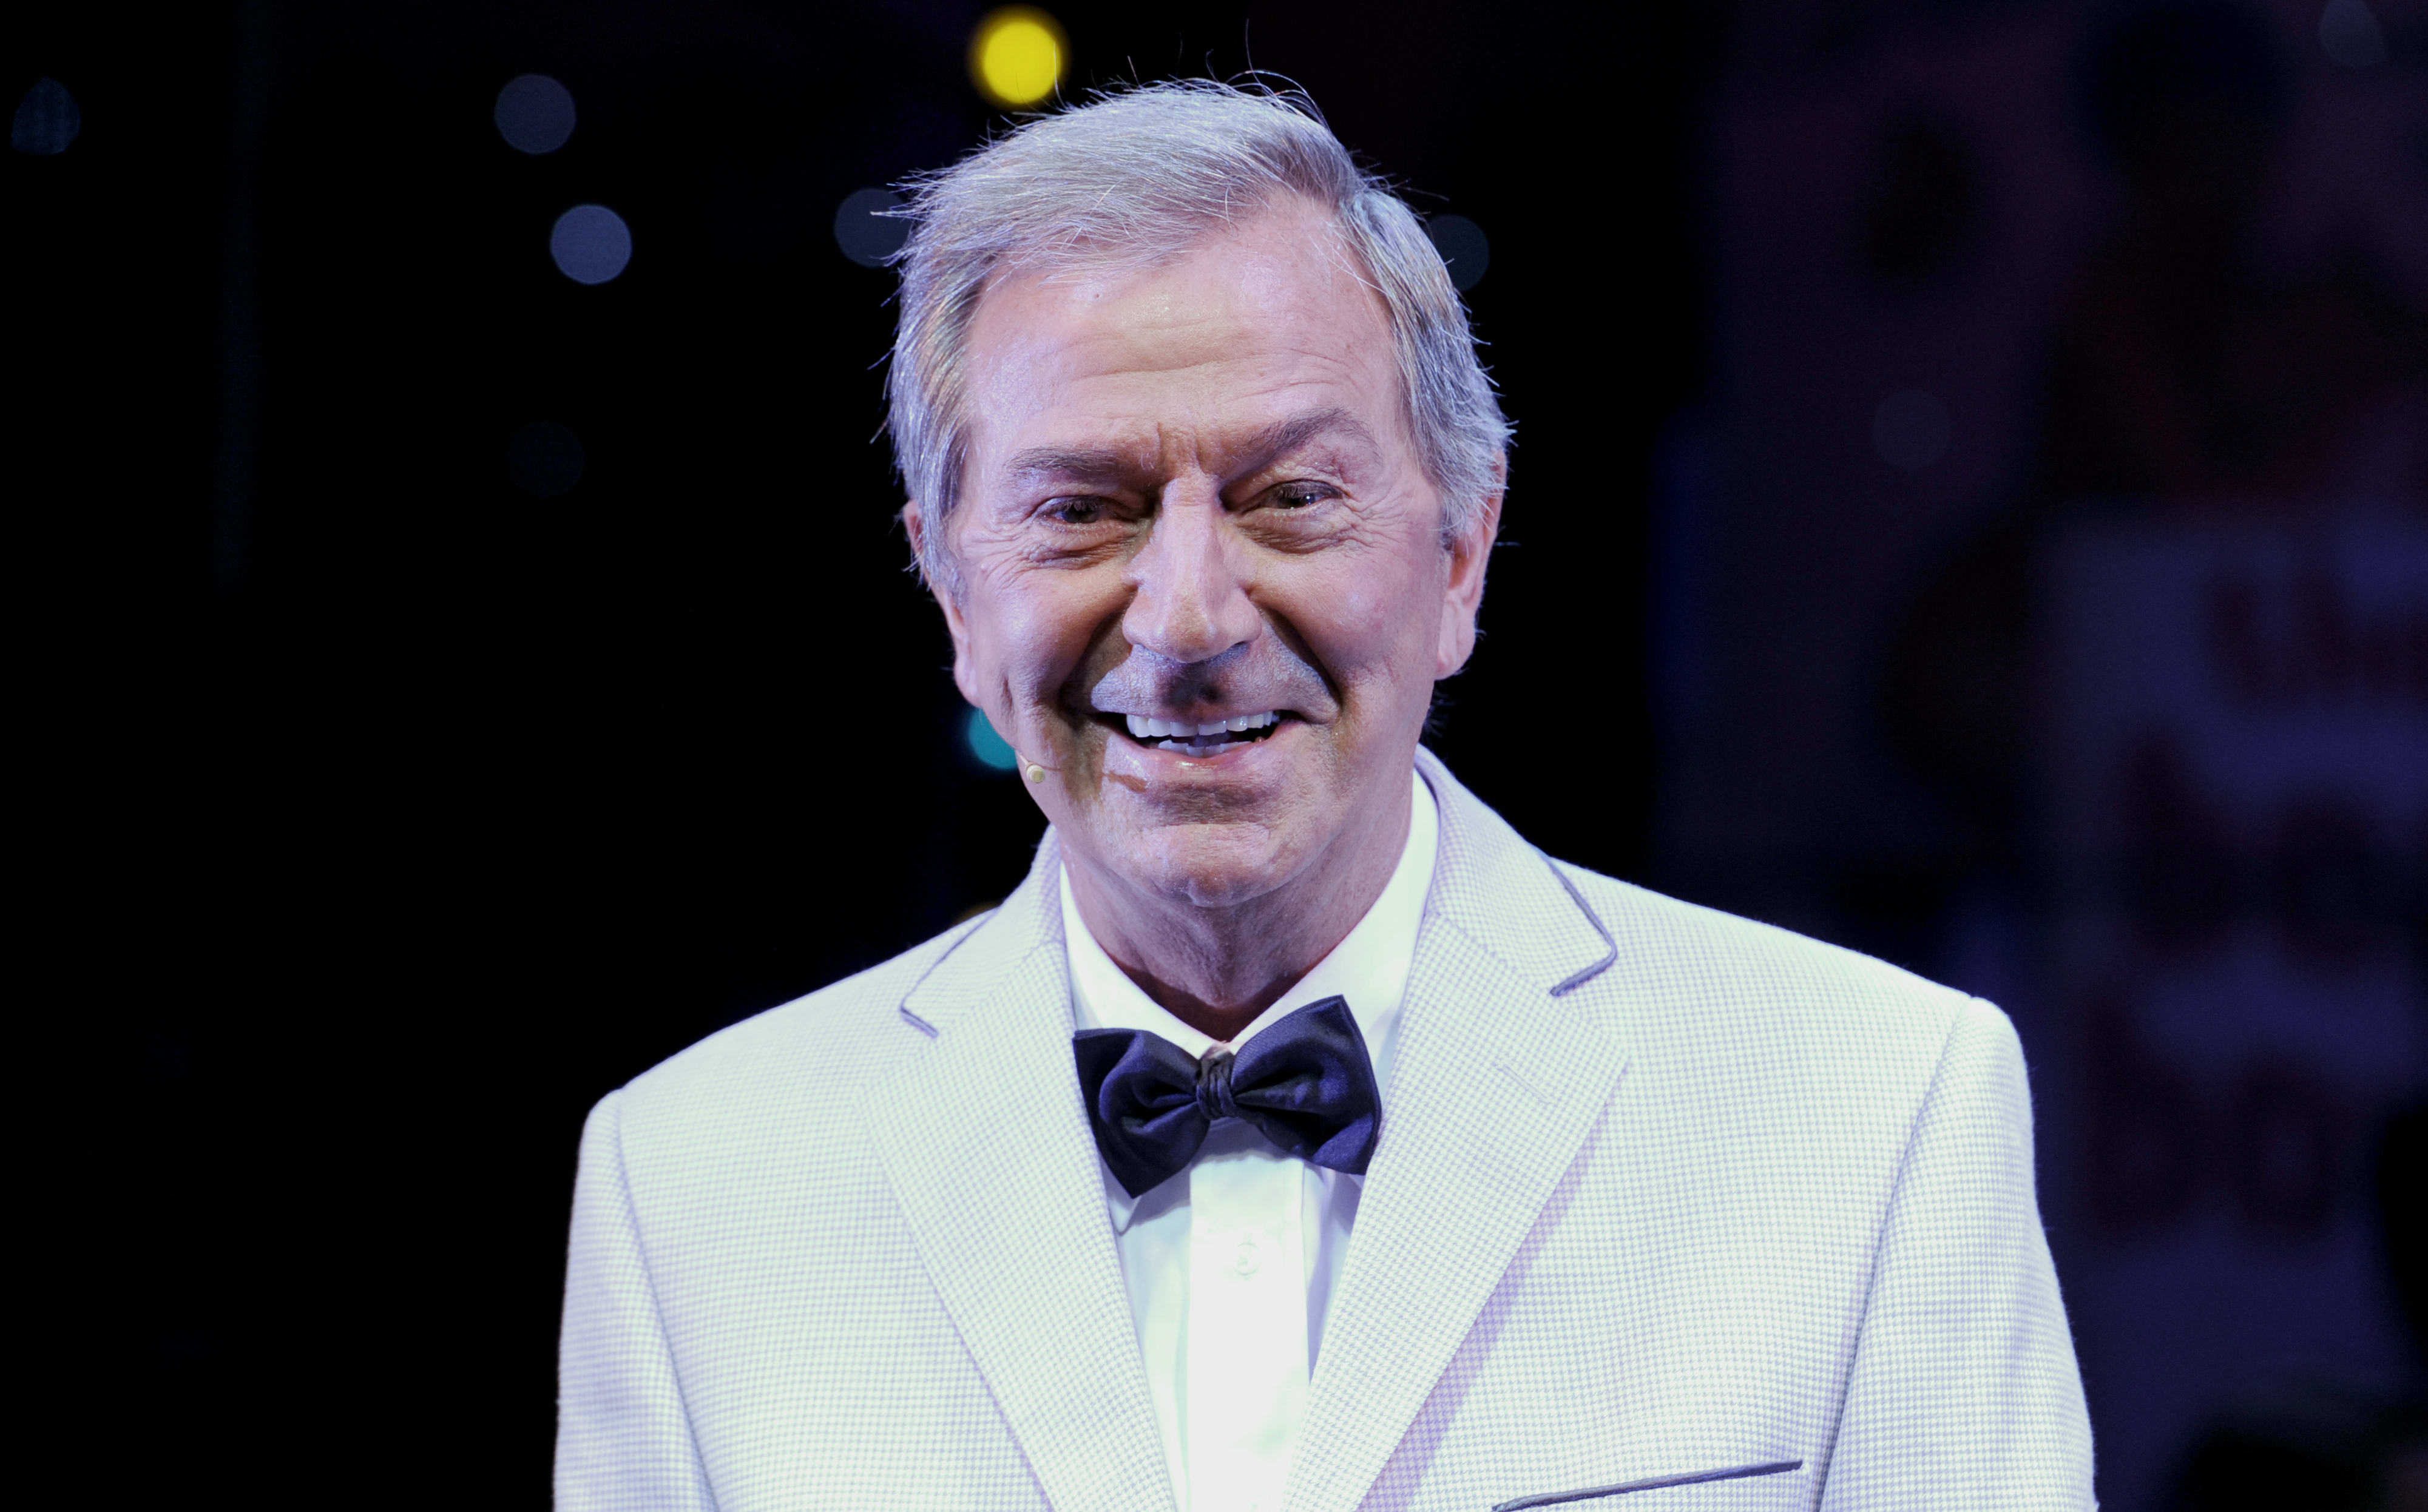 Des O'Connor in "Dreamboats and Petticoats" at the Playhouse Theatre in London, 2011.